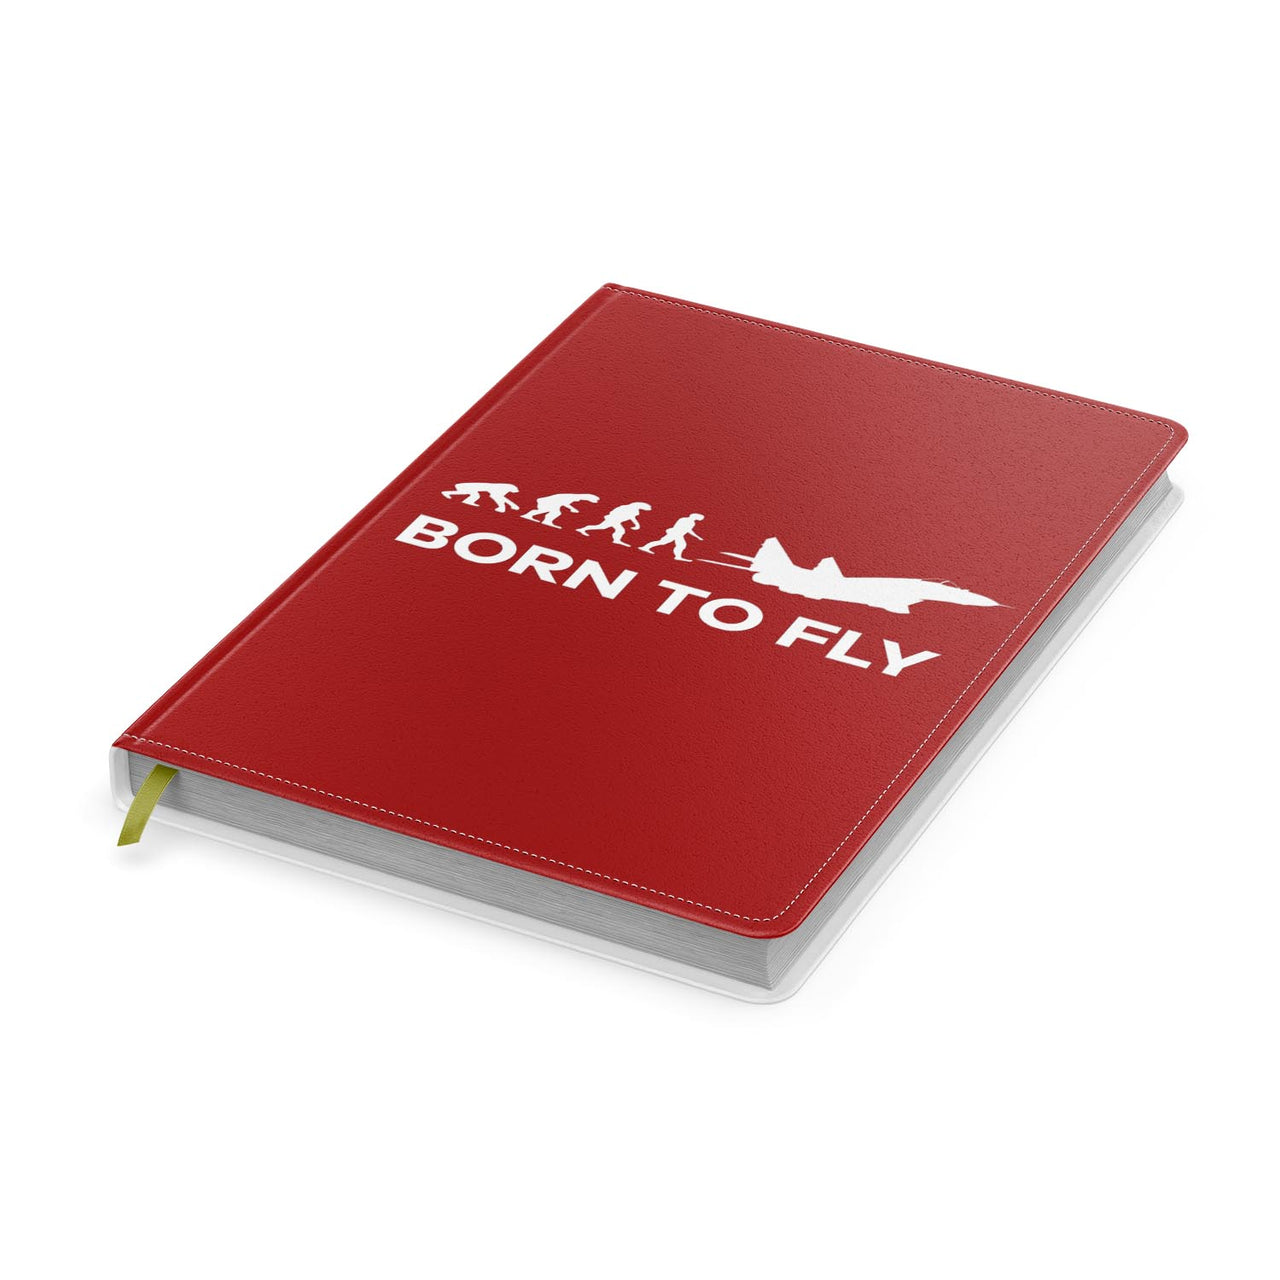 Born to Fly Military Designed Notebooks